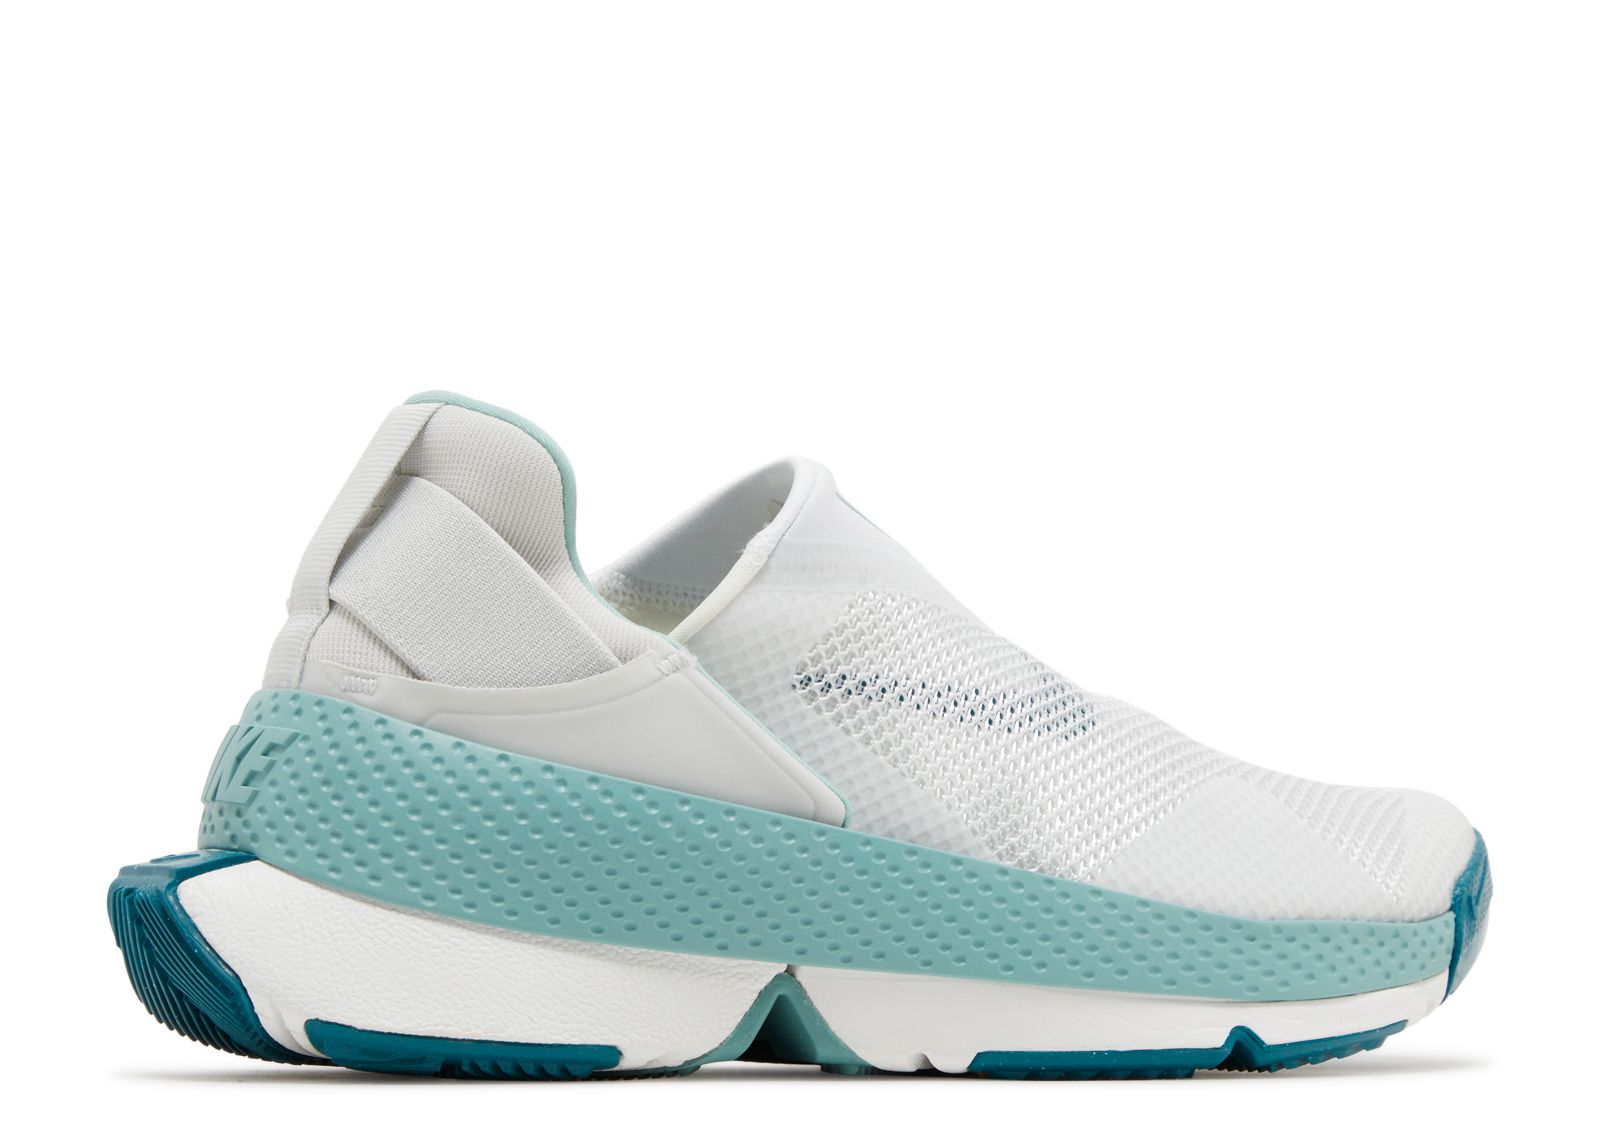 Wmns GO FlyEase 'Photon Dust Geode Teal' - Nike - DR5540 013 ...